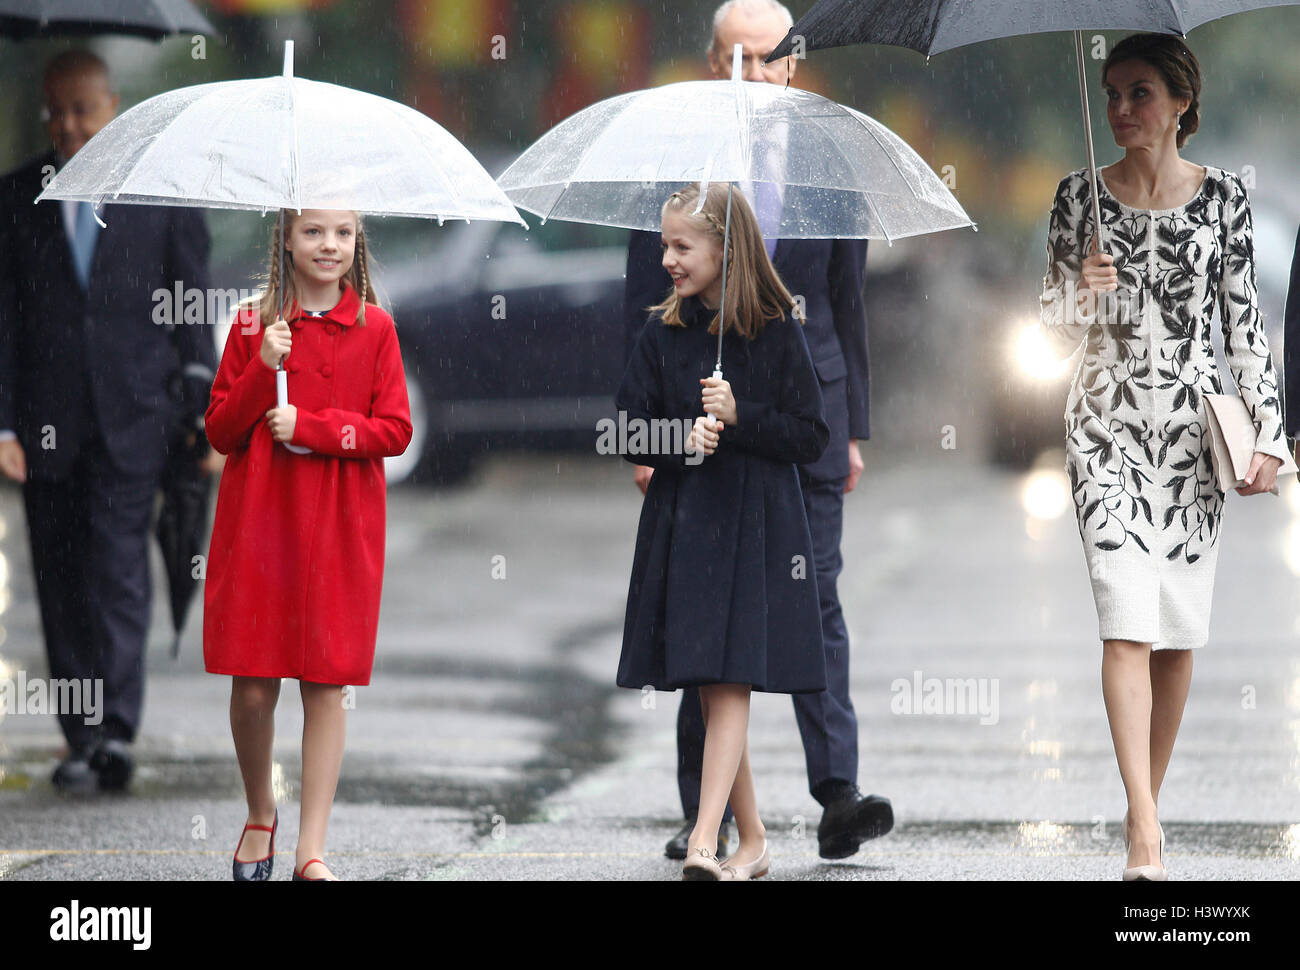 Madrid, Spain. 12th October, 2016. Queen Letizia Ortiz and their daughters princesses Leonor and Sofia of Borbon attending a military parade, during the known as Dia de la Hispanidad, Spain's National Day, in Madrid, on Wednesday 12nd October, 2016. Credit:  Gtres Información más Comuniación on line,S.L./Alamy Live News Stock Photo